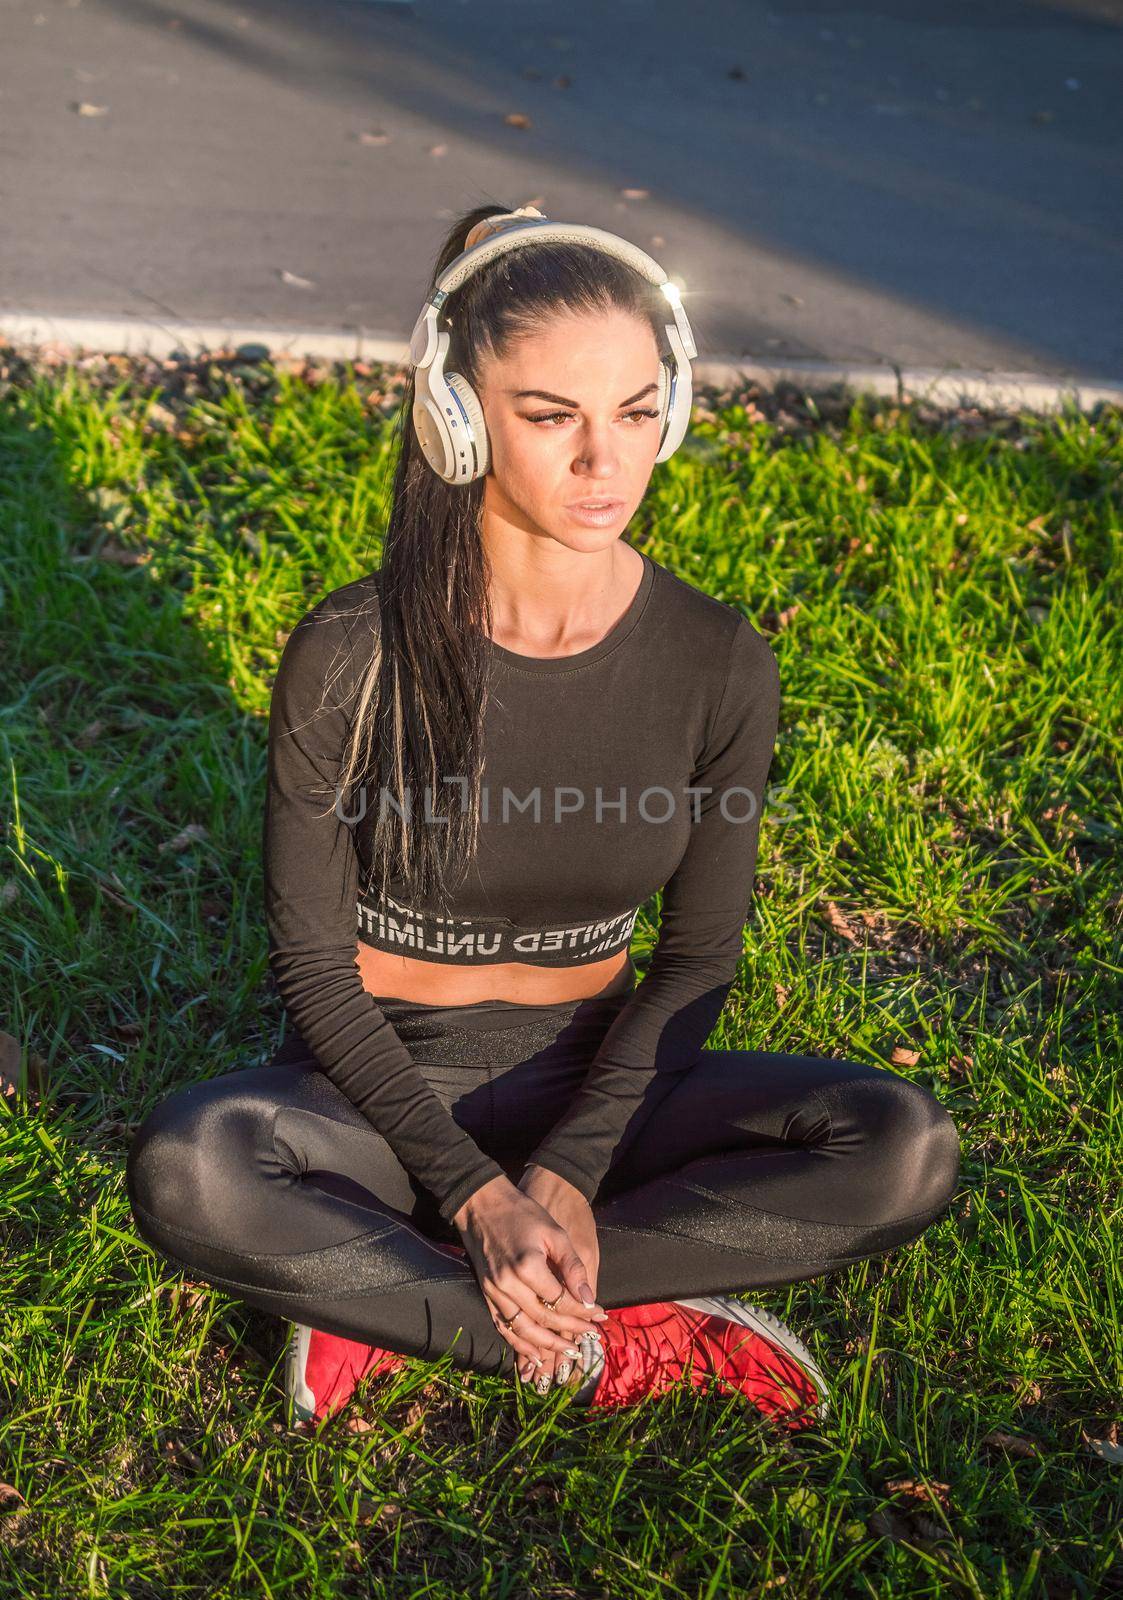 Fit girl listening to music./Fitness woman outdoors with headphones.